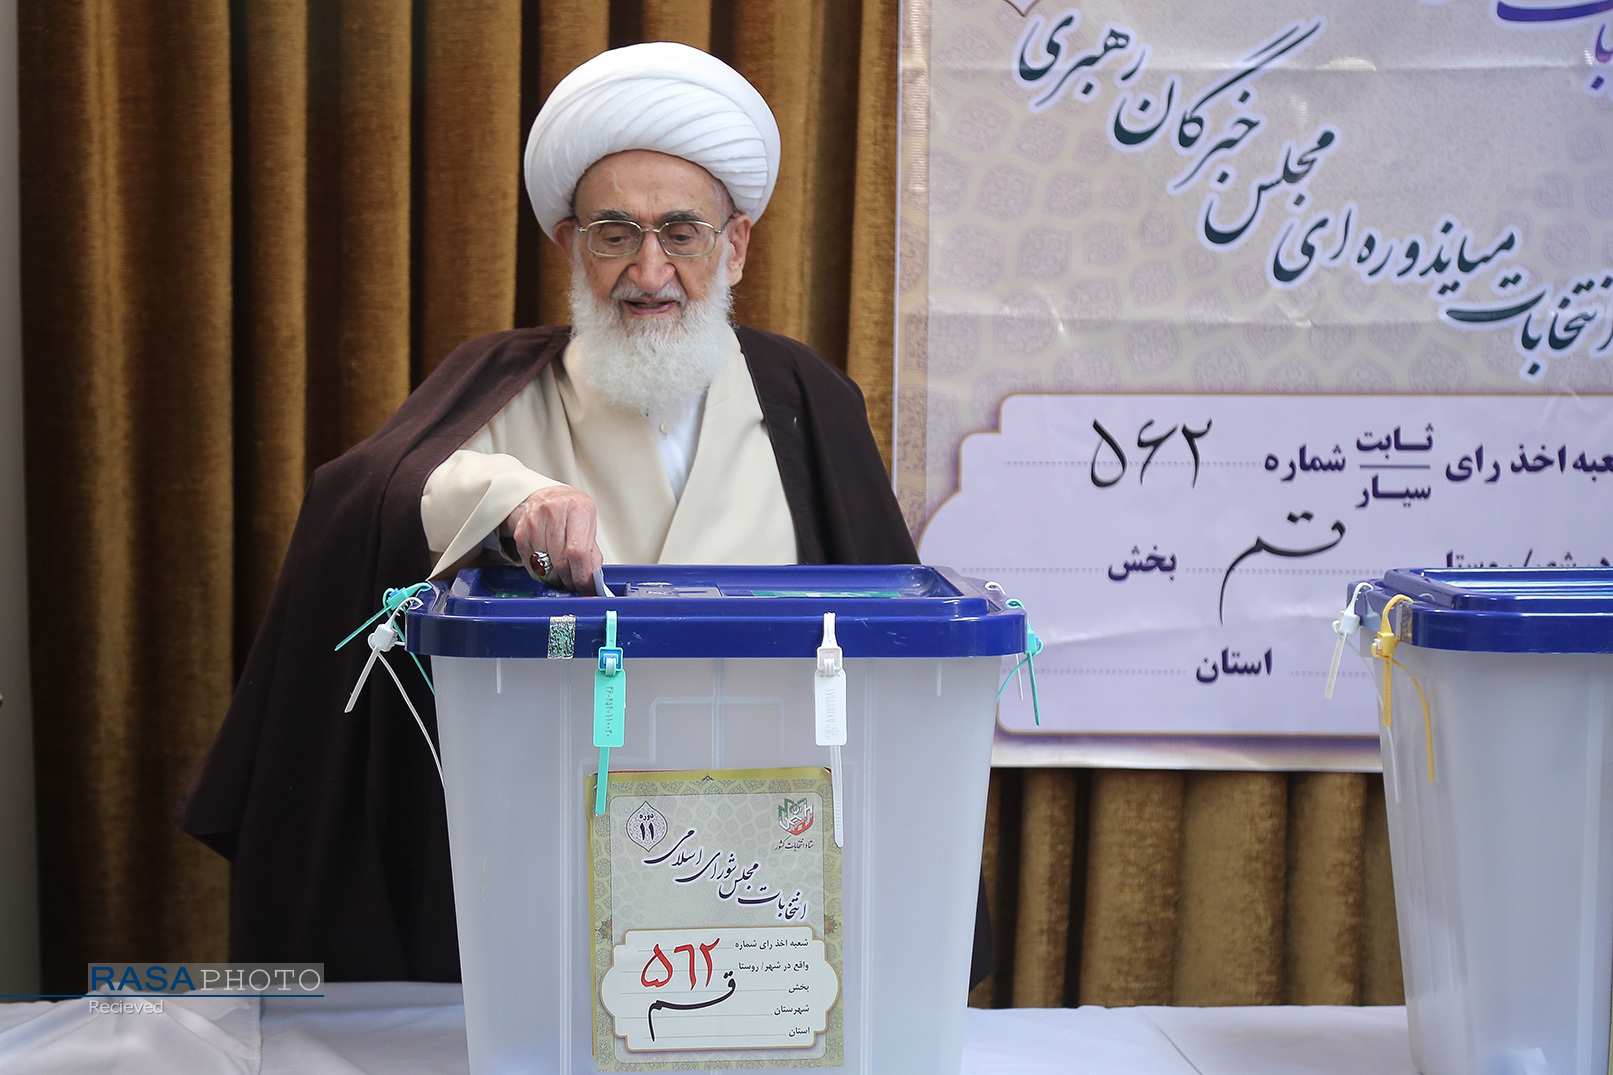 Ulama and Islamic scholars participated in elections alongside people